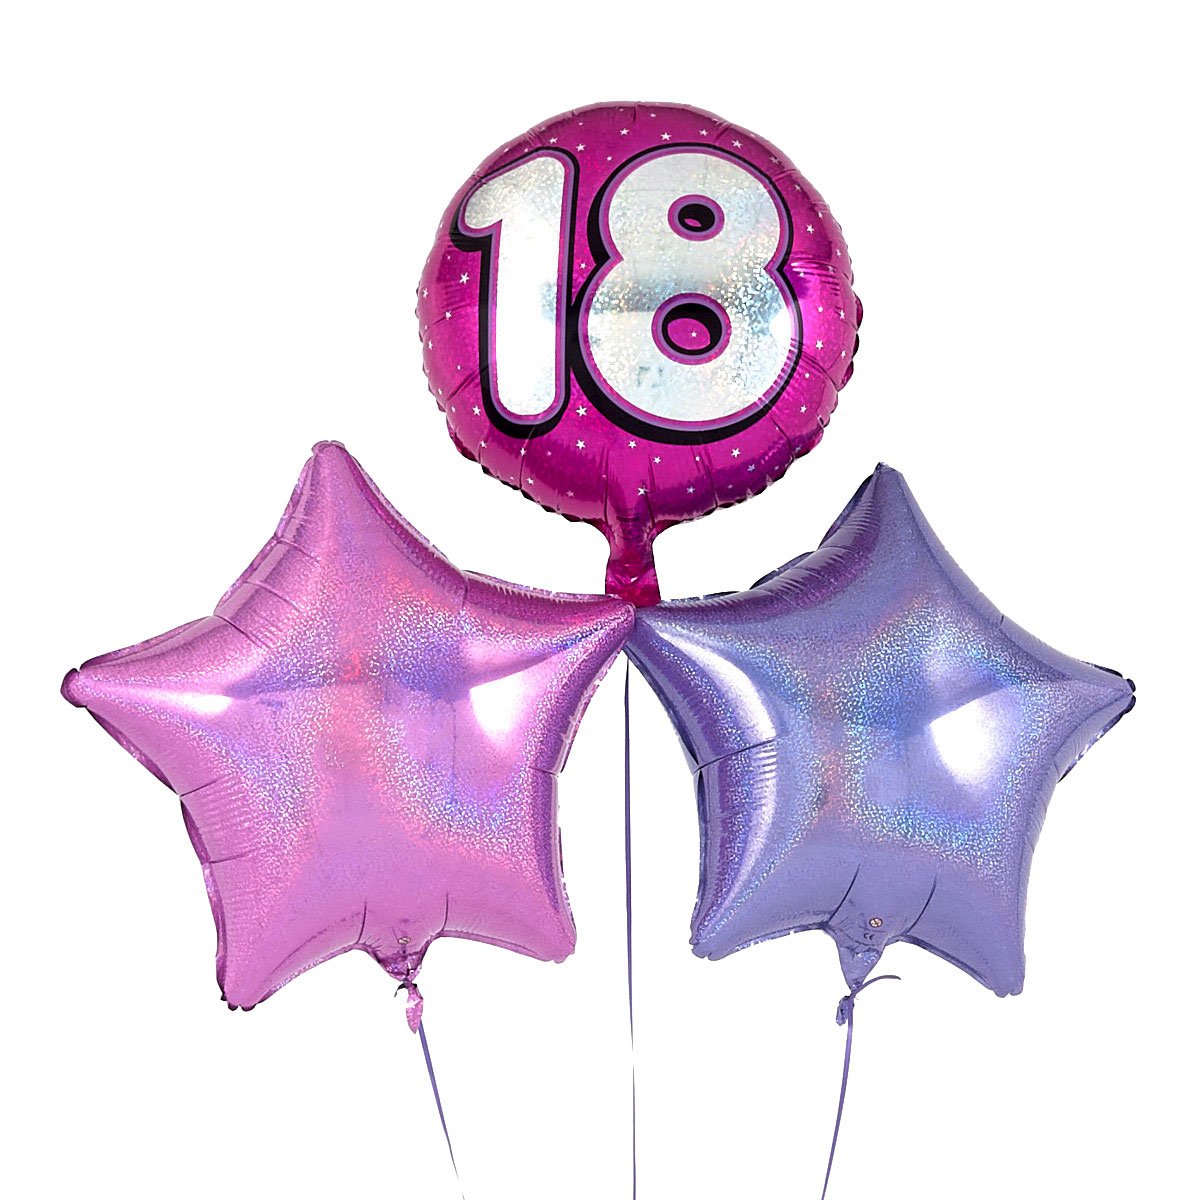 Pink 18th Birthday Balloon Bouquet - DELIVERED INFLATED!